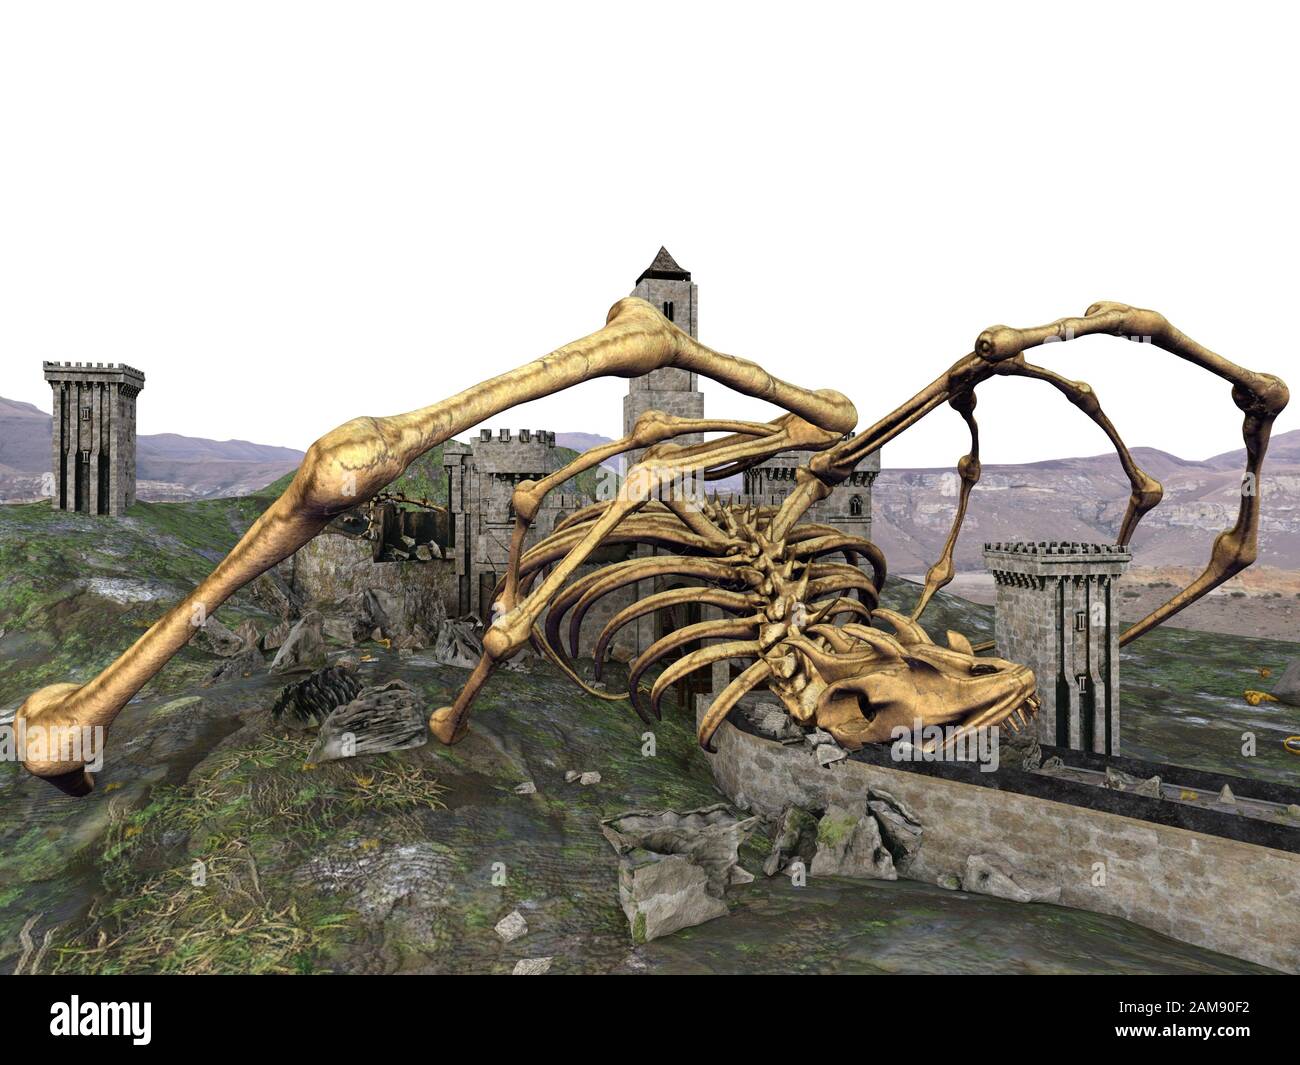 3D illustration dragon skeleton and ruined castle Stock Photo - Alamy